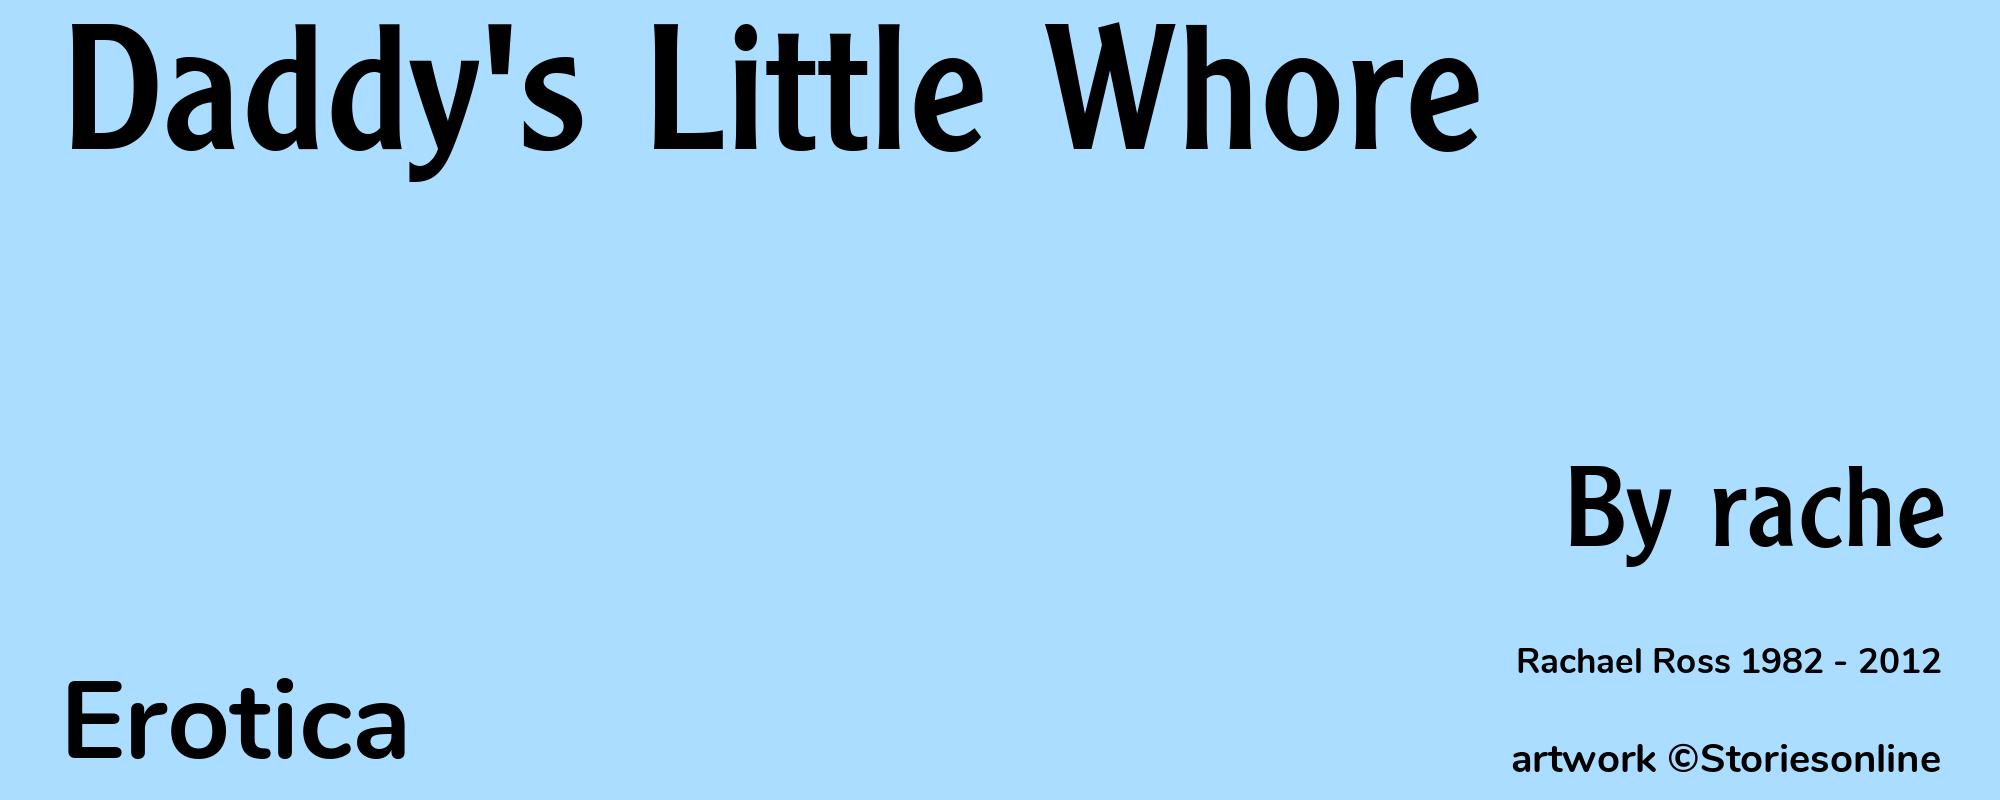 Daddy's Little Whore - Cover